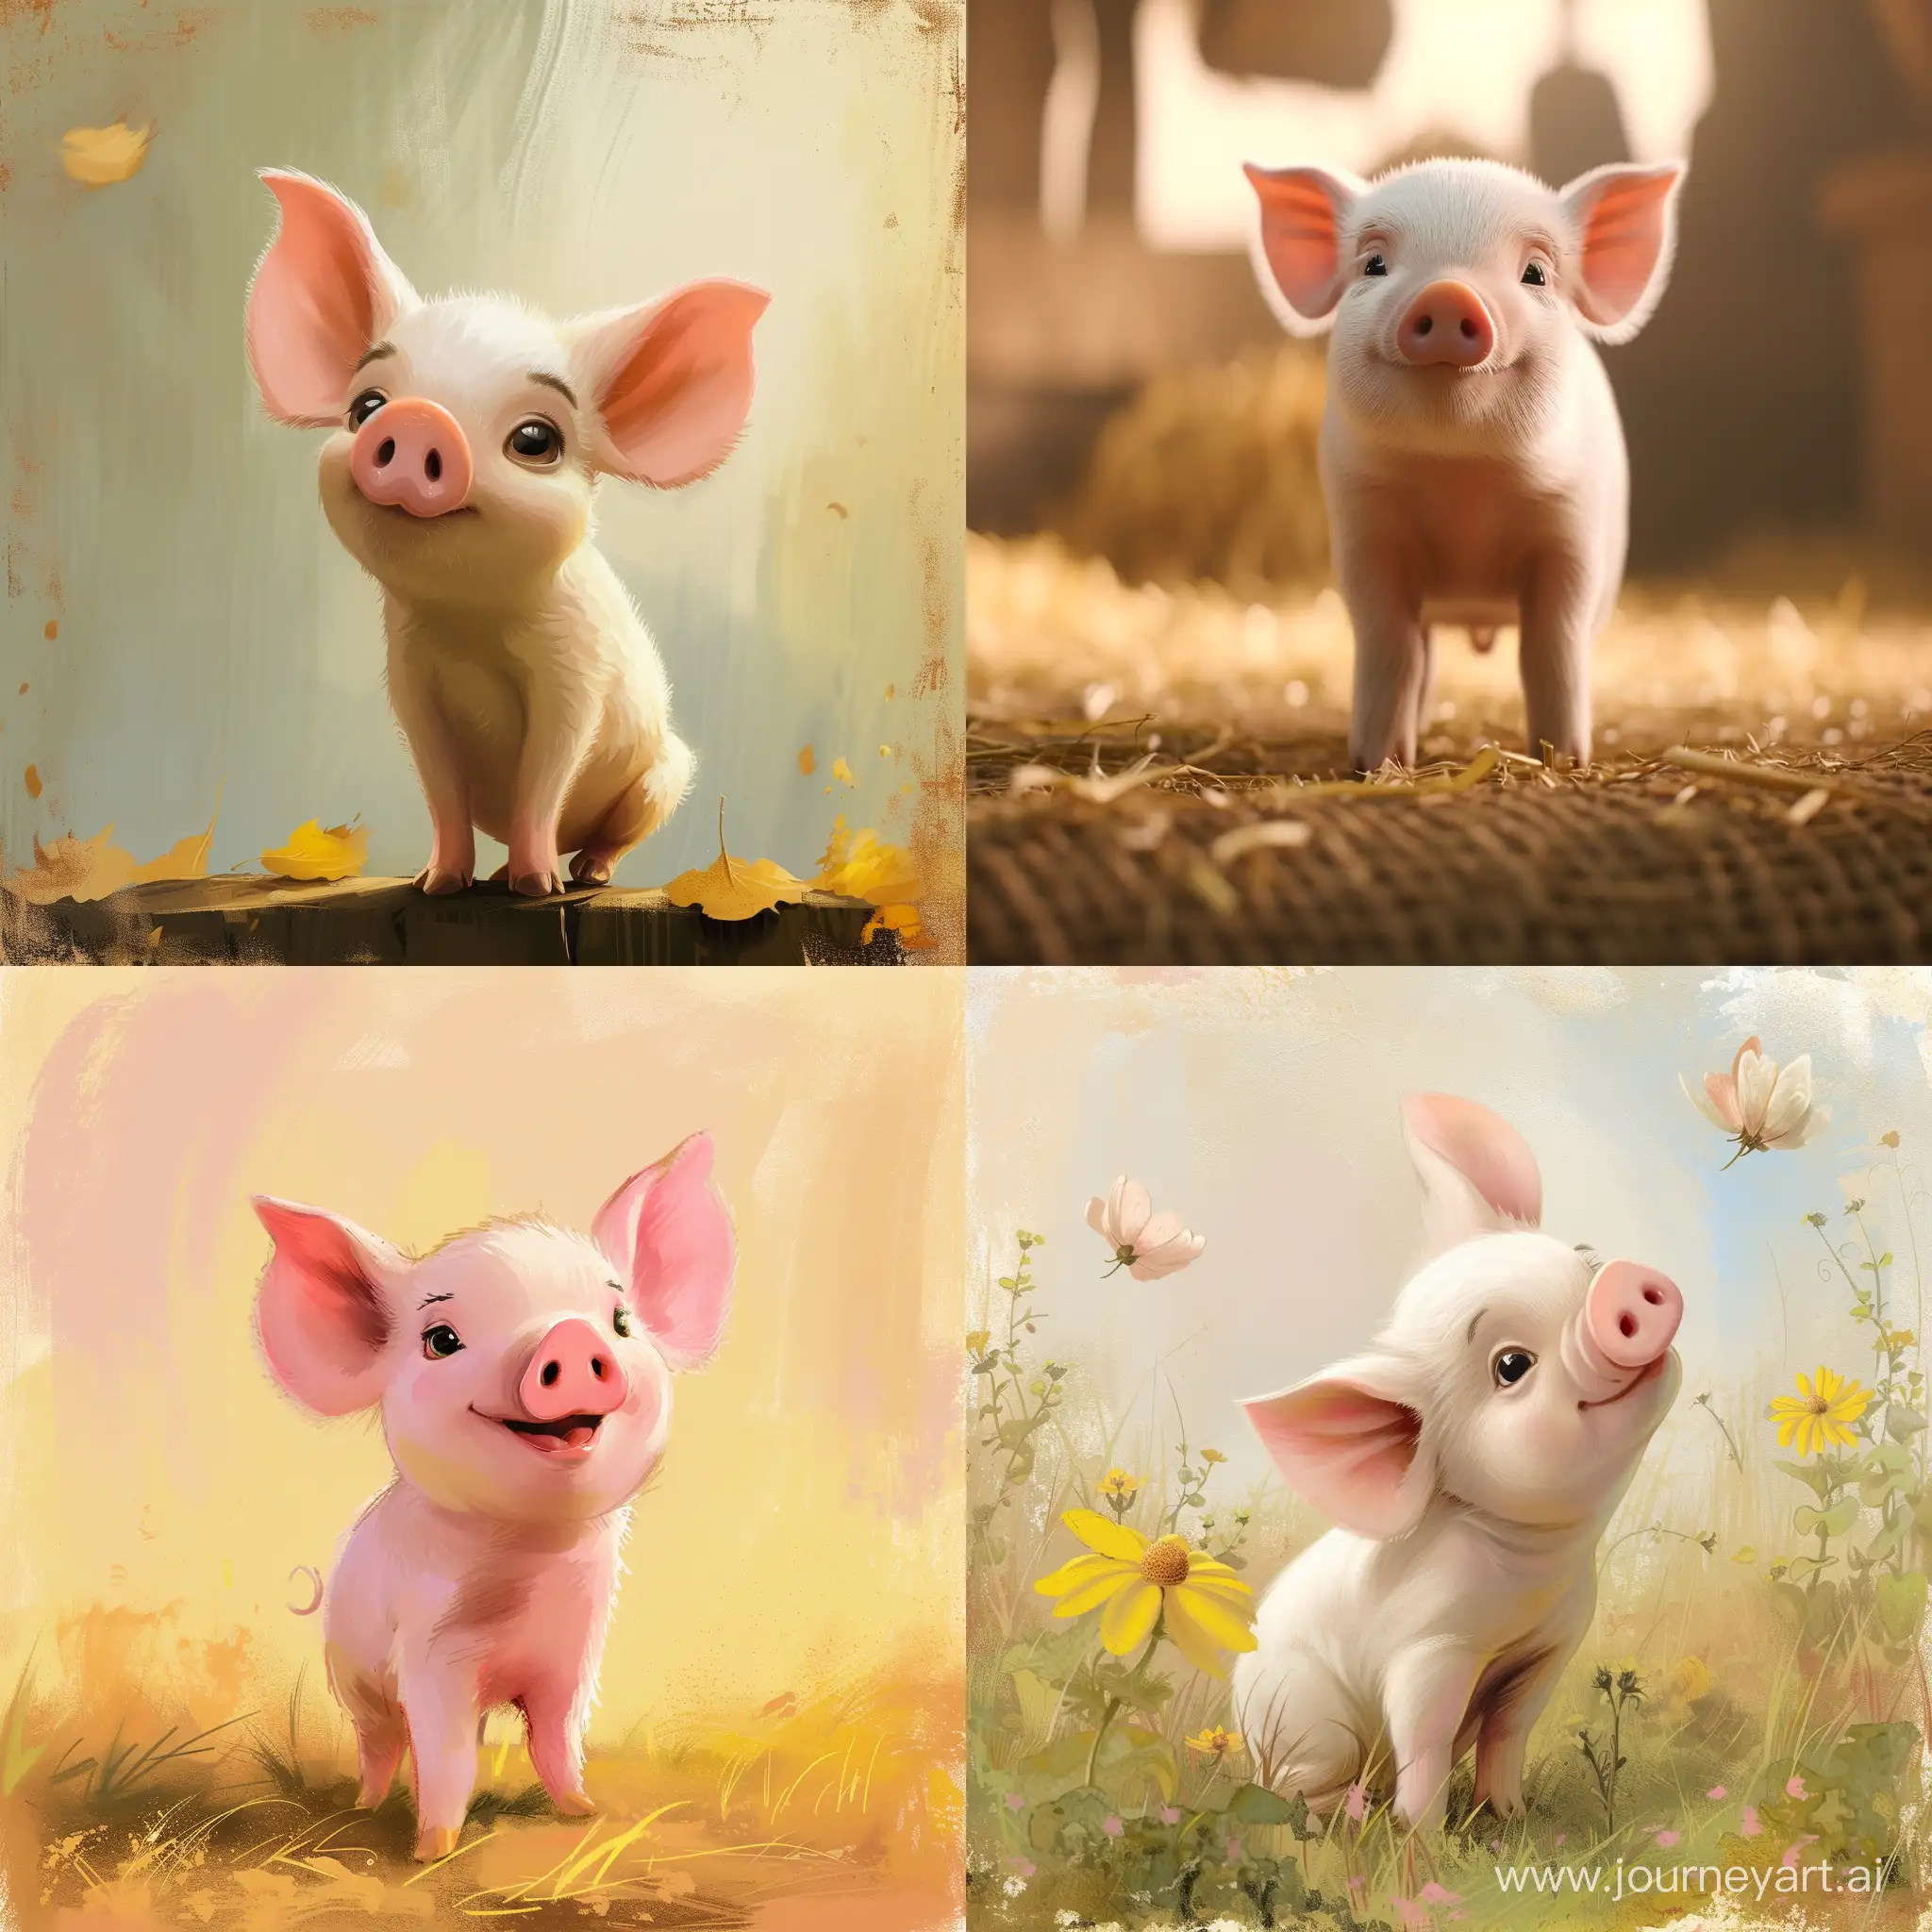 Adorable-Piglet-with-Version-6-Features-and-Aspect-Ratio-11